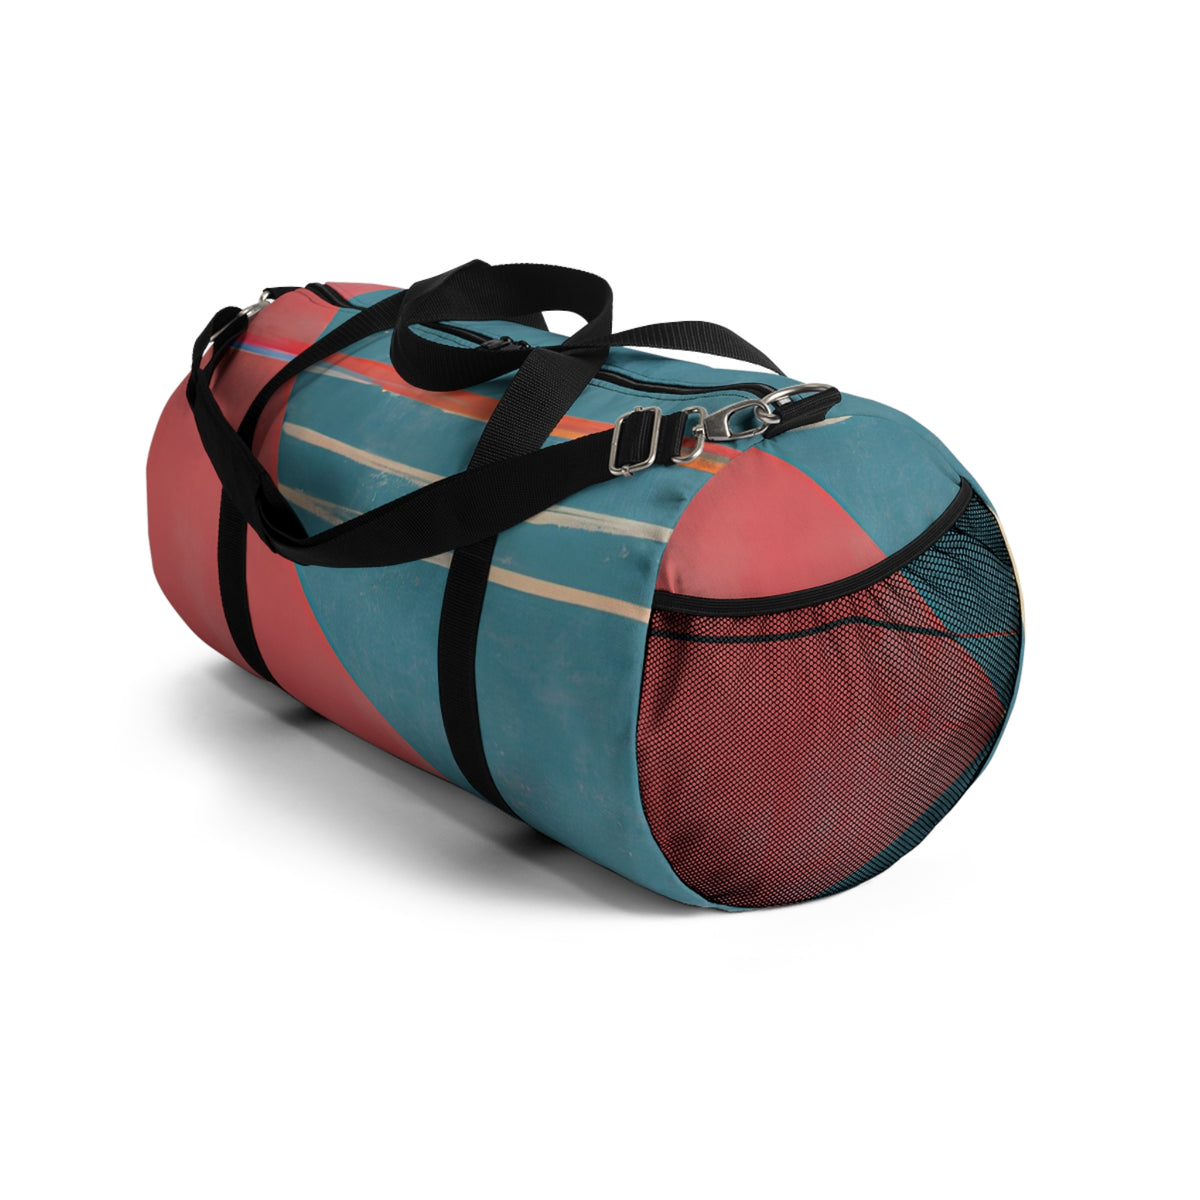 Since there were no luxury duffel bag designers in the 1600s, this is an impossible question to answer. -Duffel Bag